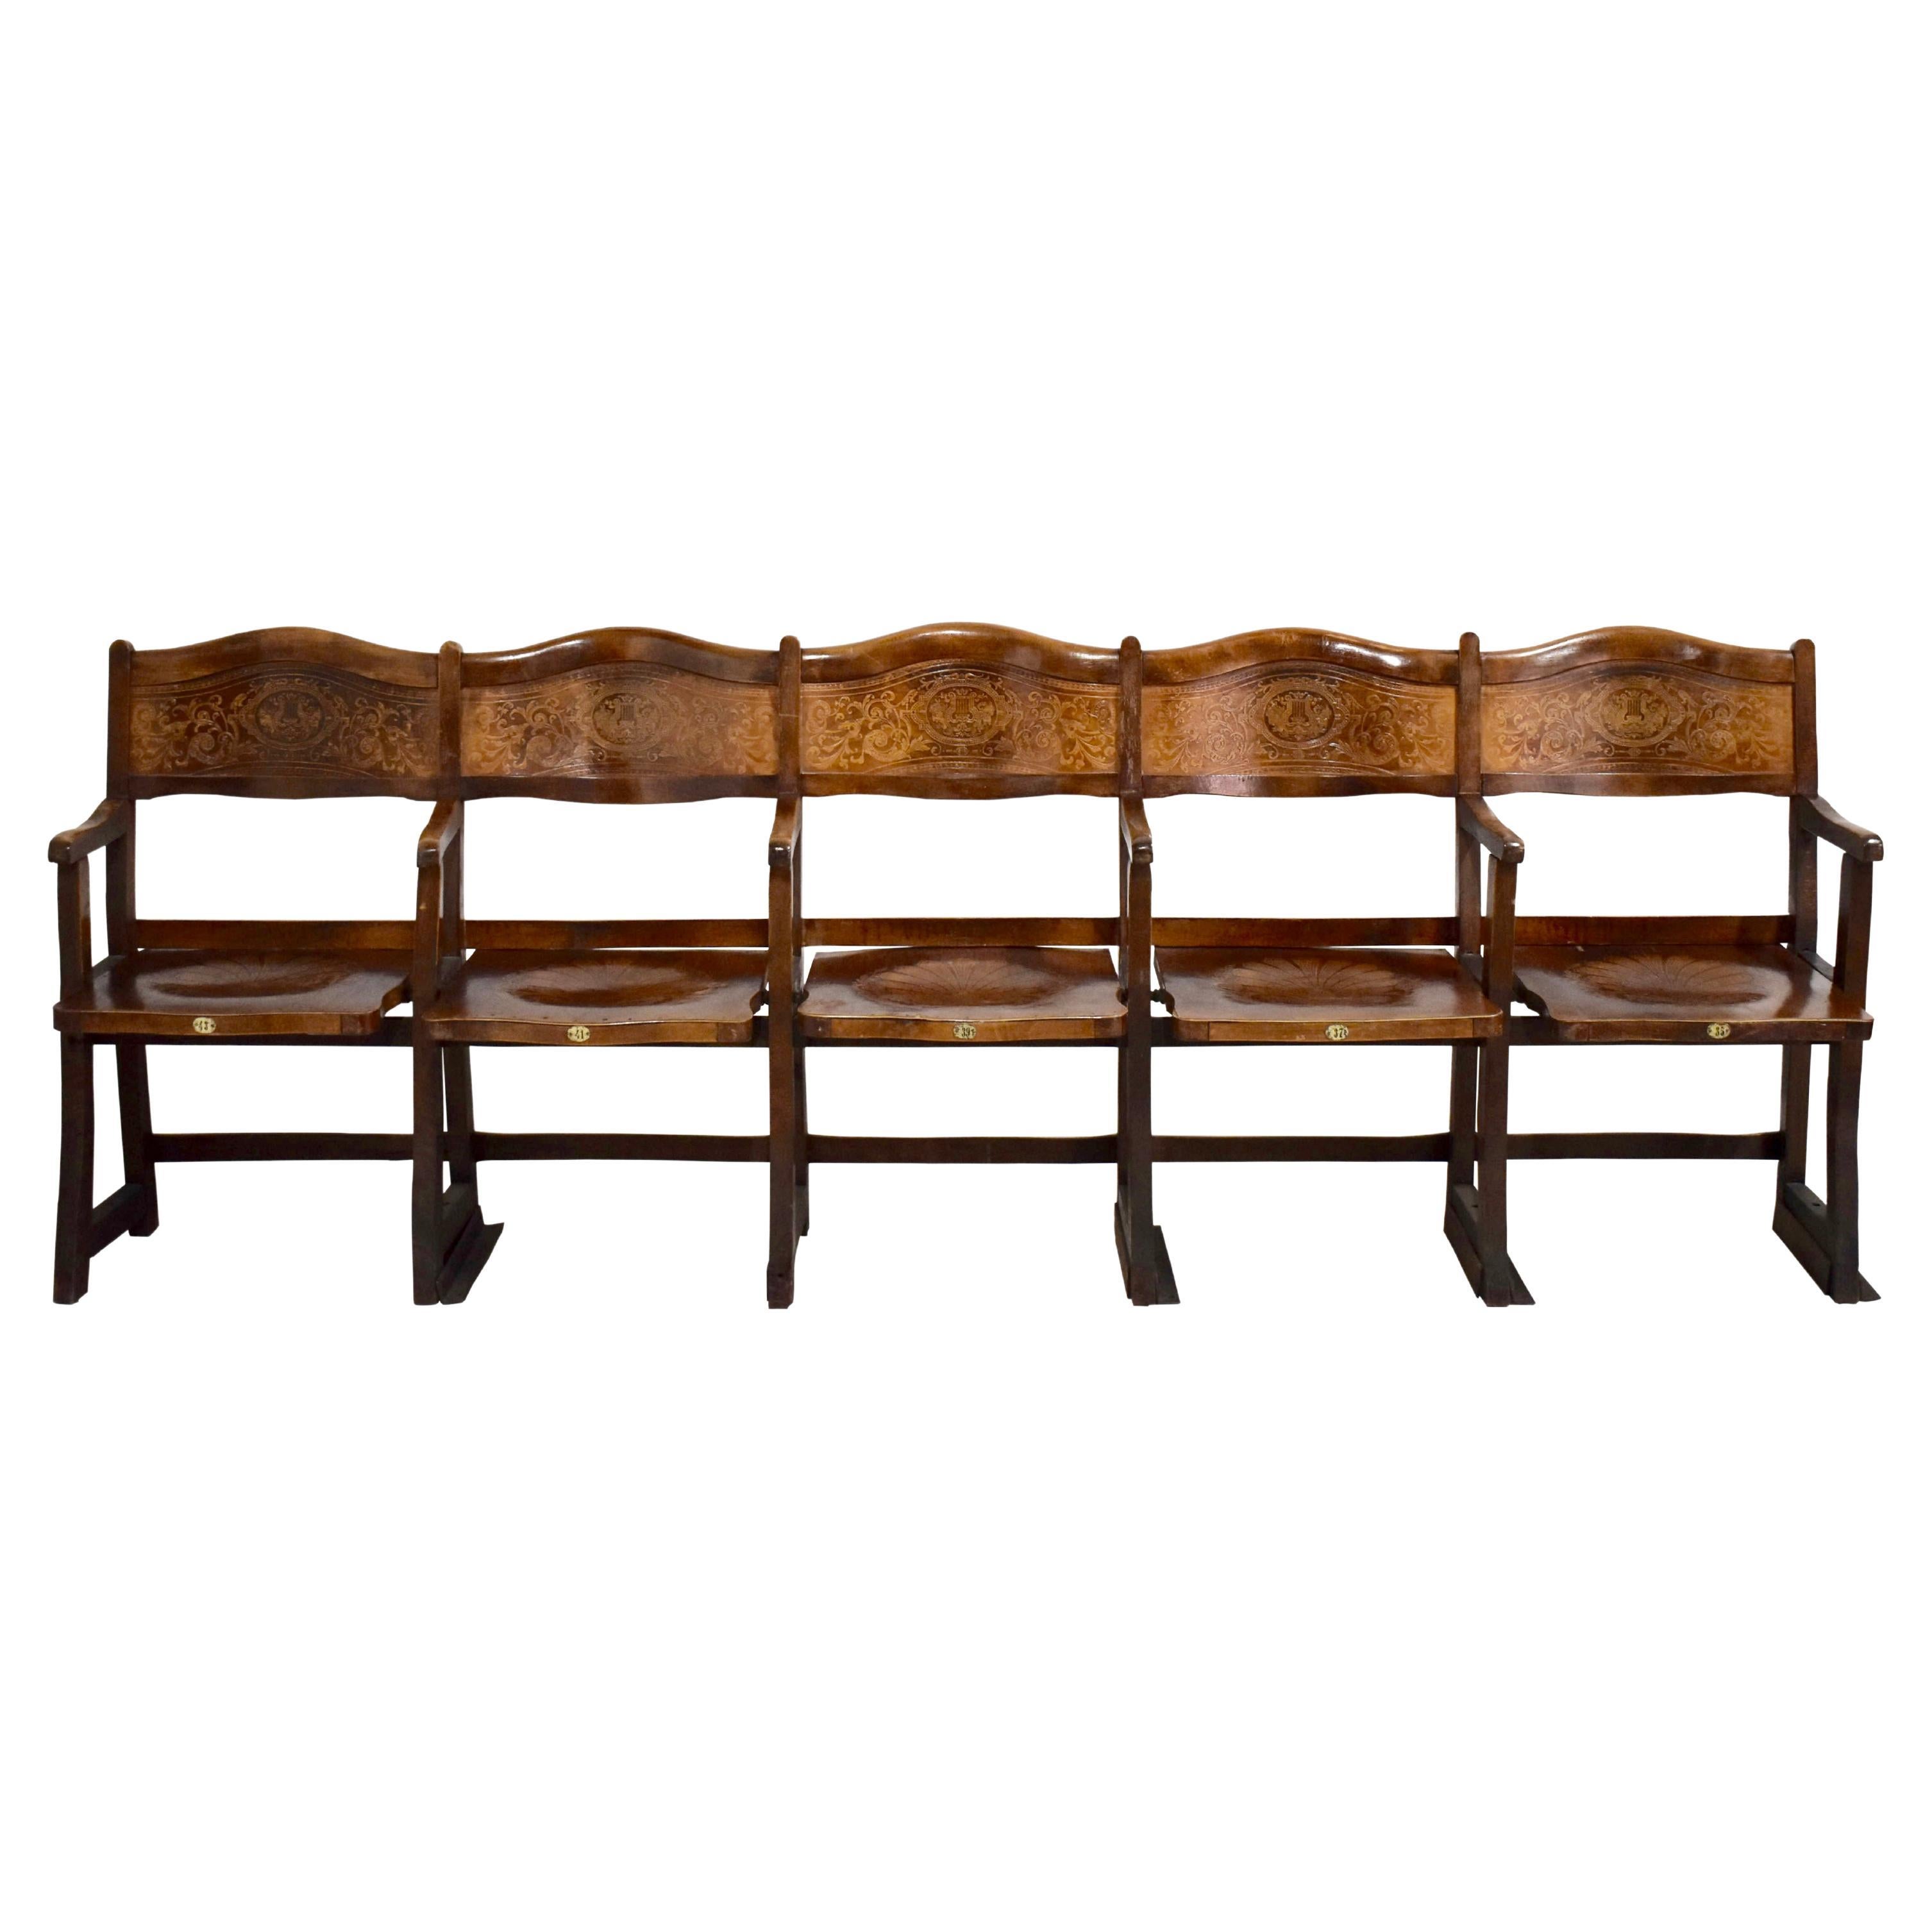 Art Nouveau Theatre Seats Row of Five Chairs, circa 1910 For Sale